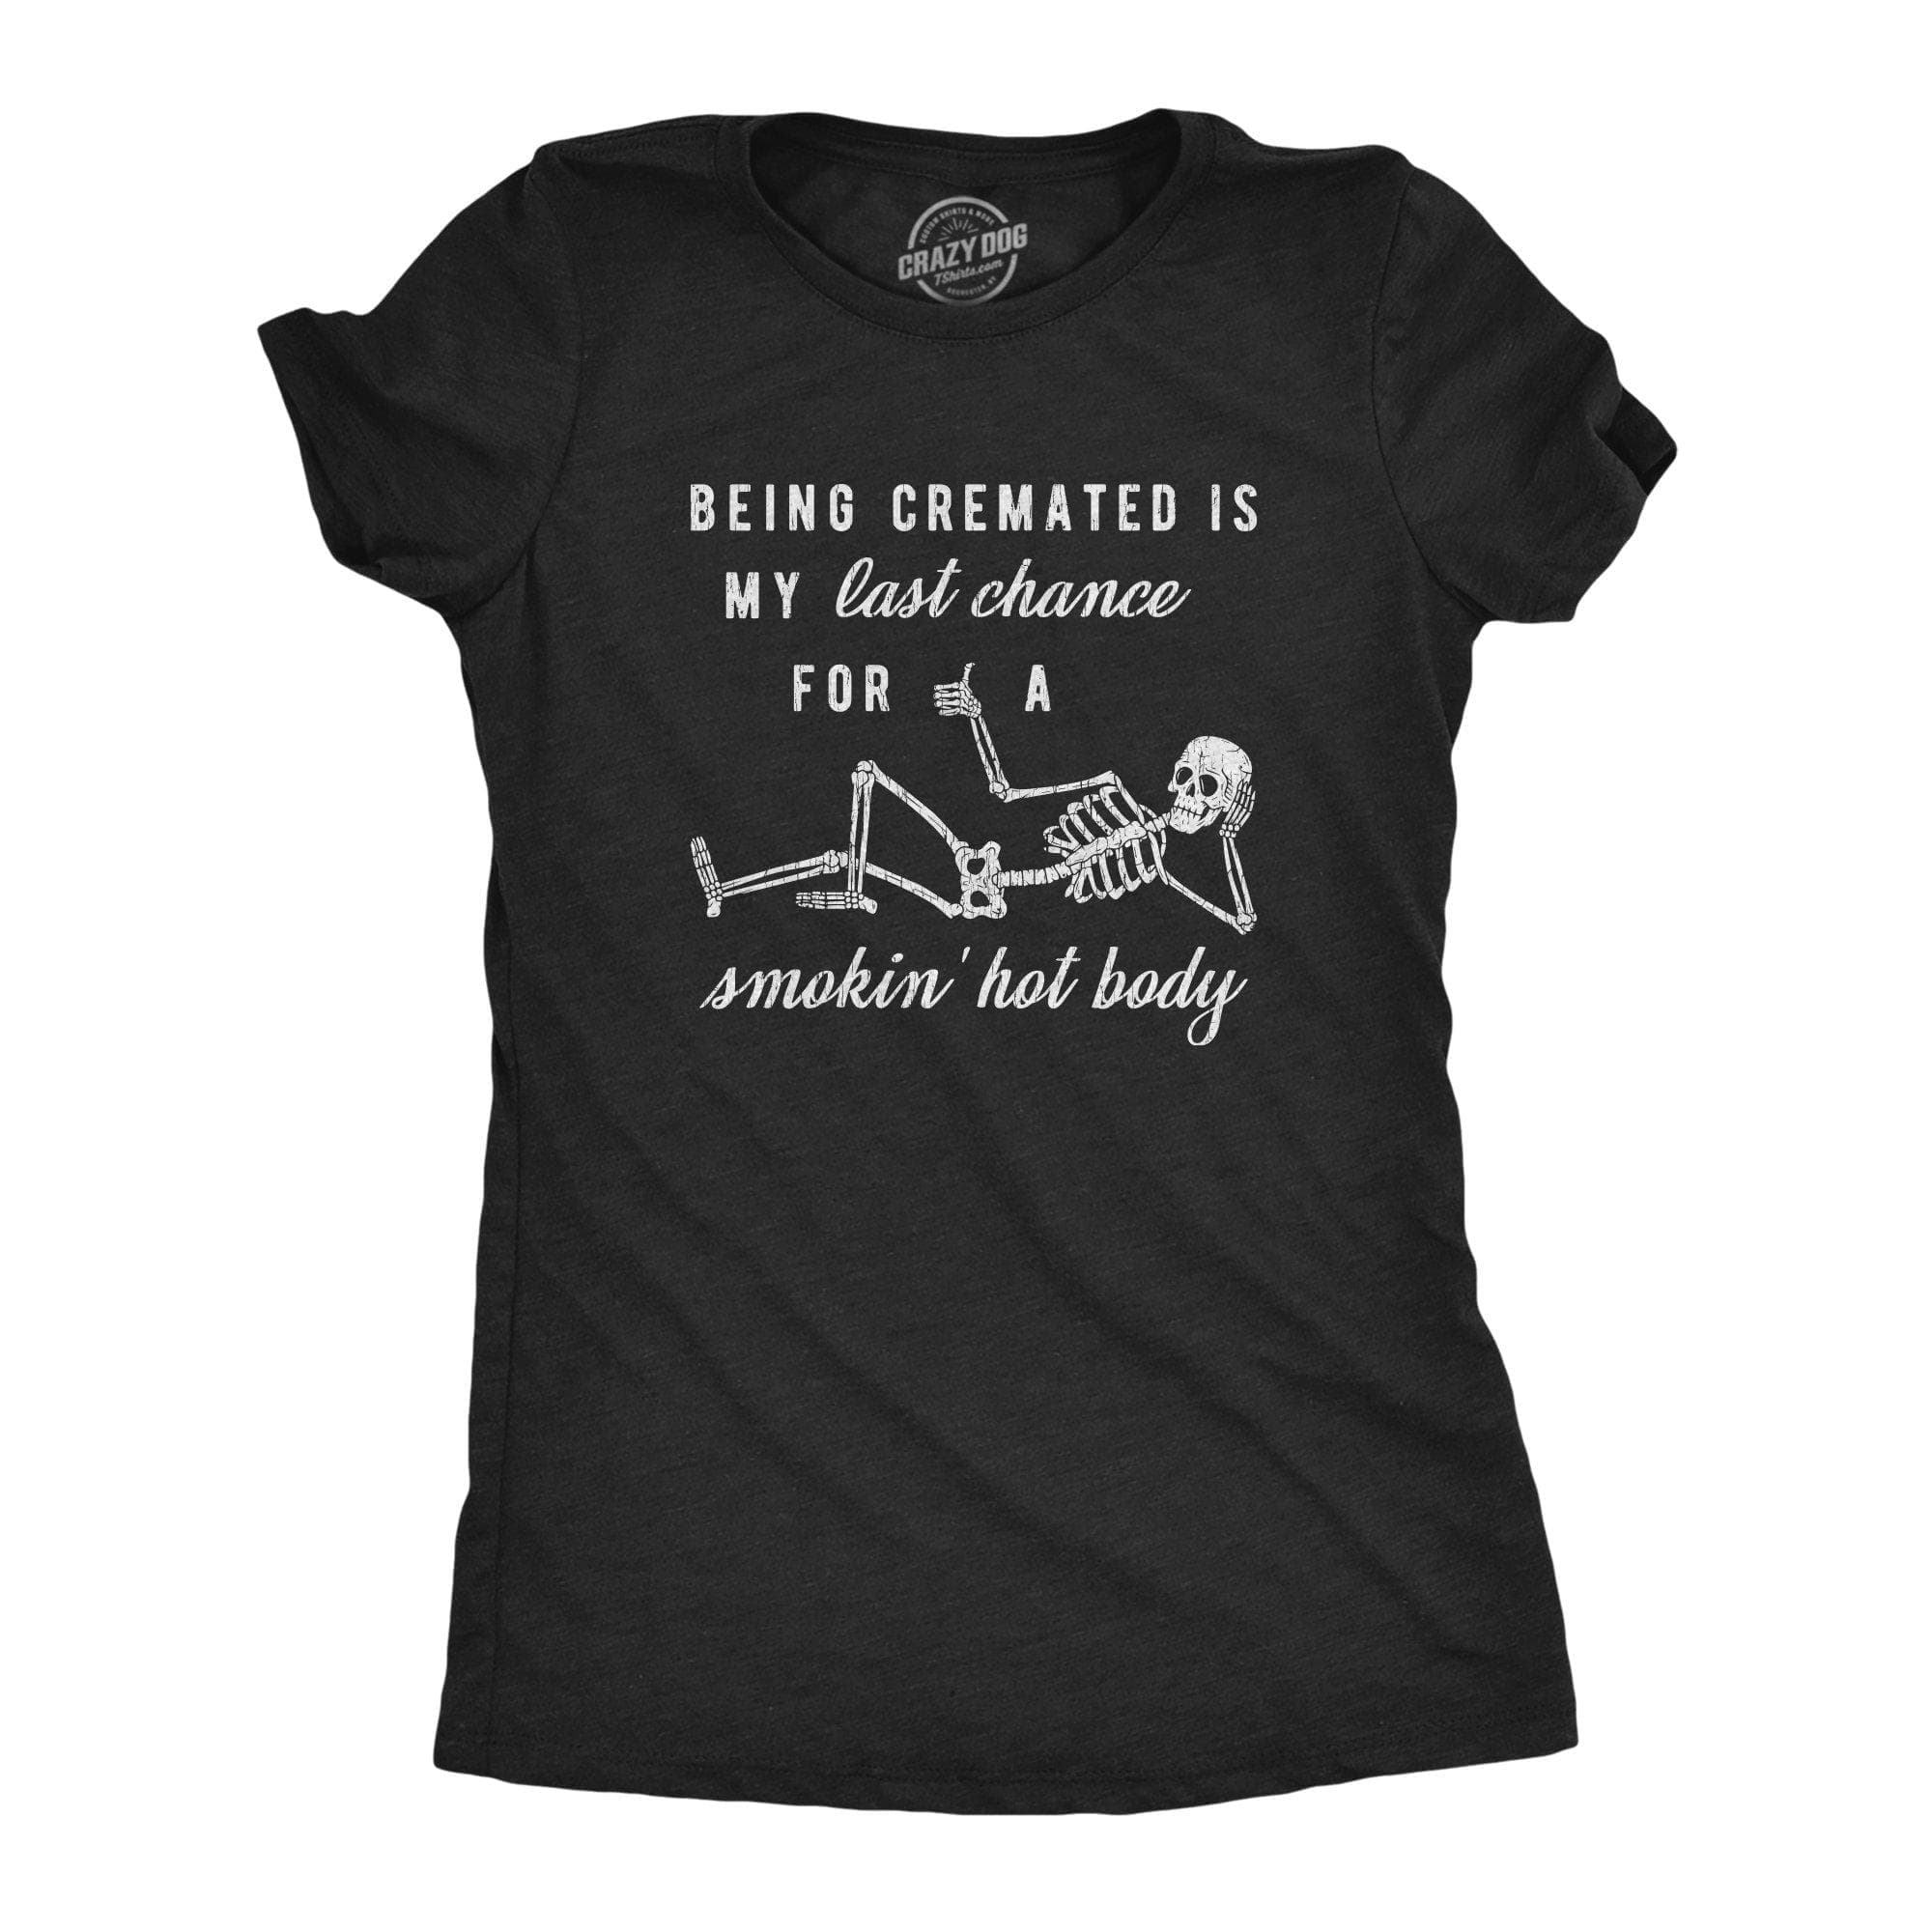 Being Cremated Is My Last Chance For A Smokin' Hot Body Women's Tshirt - Crazy Dog T-Shirts